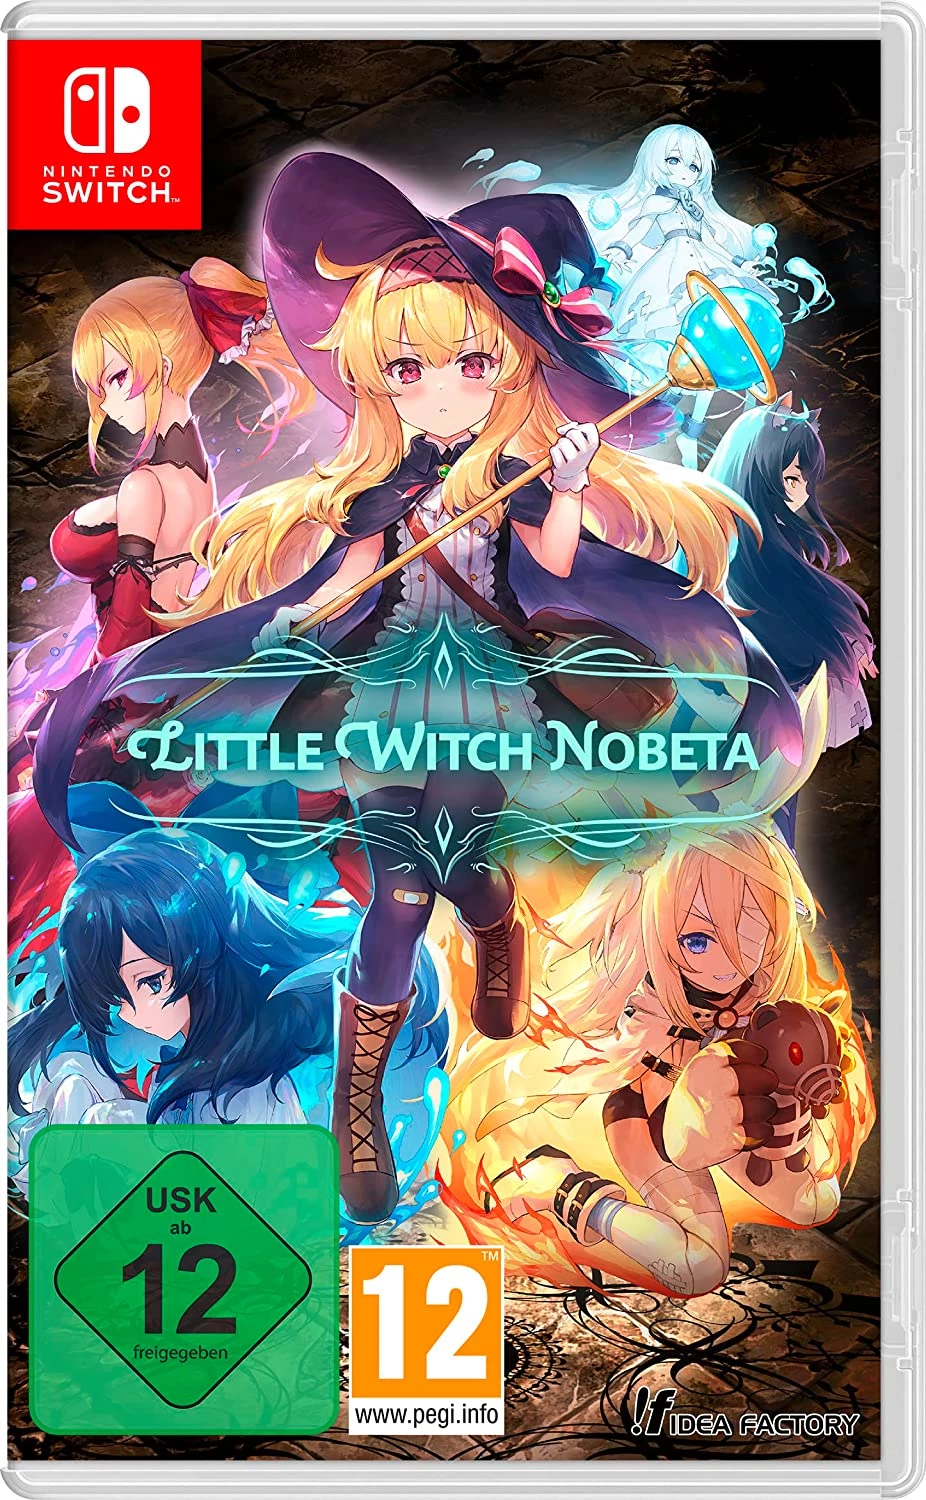 Little Witch Nobeta (Switch), Idea Factory